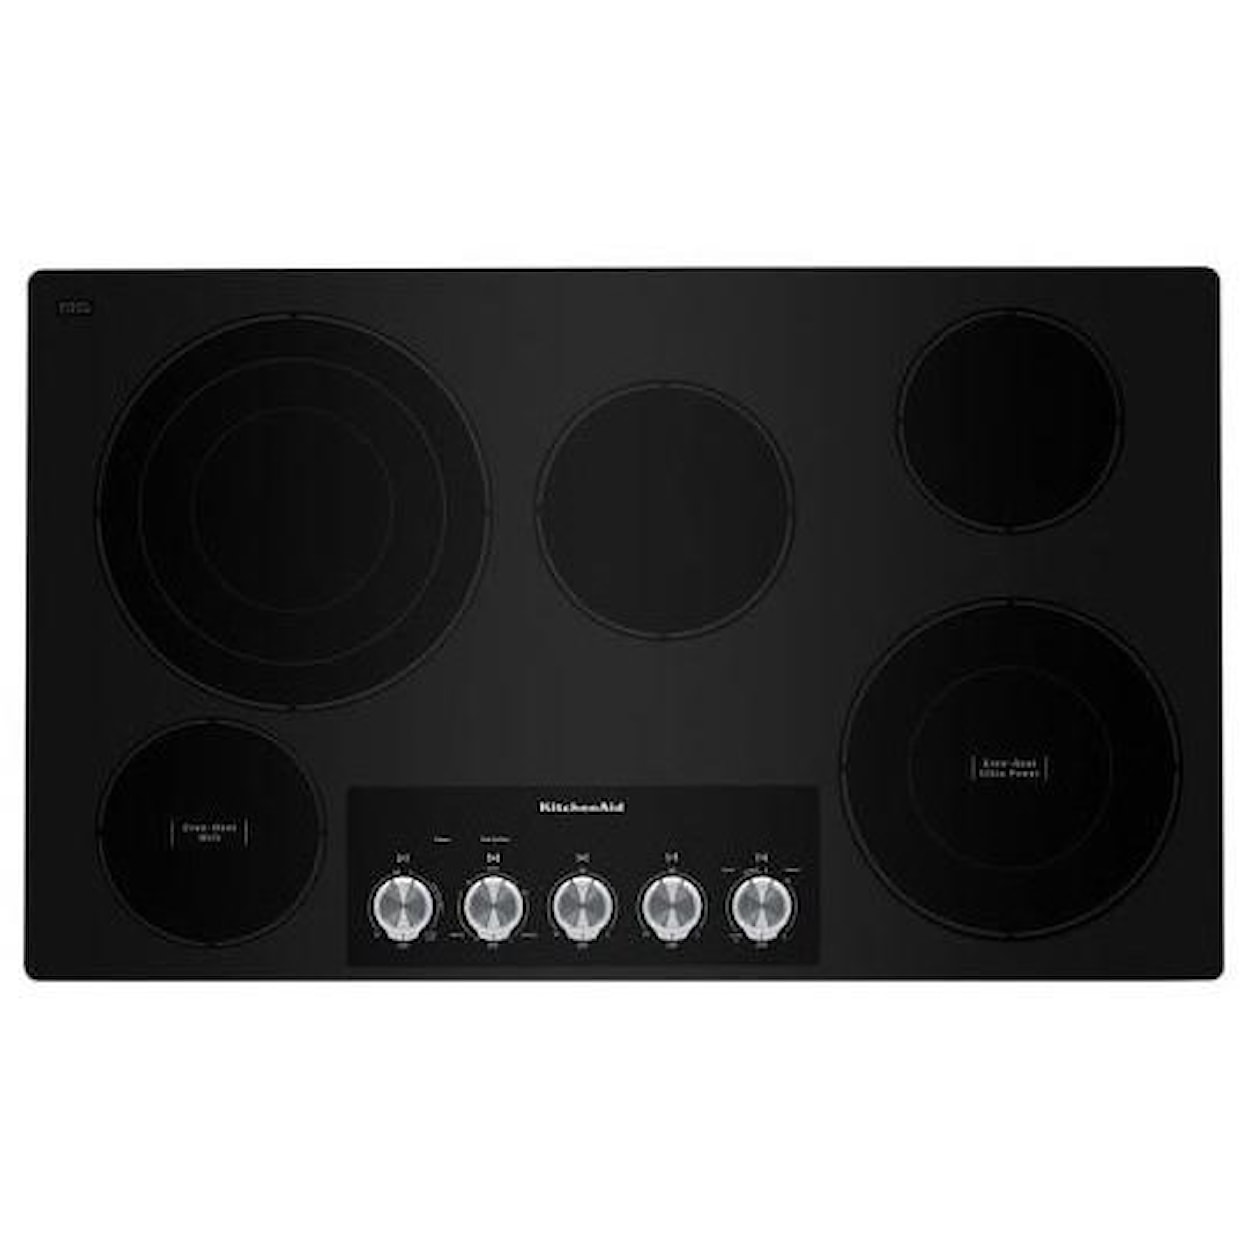 KitchenAid Electric Cooktops 36" Electric Cooktop with 5 Elements and Kno